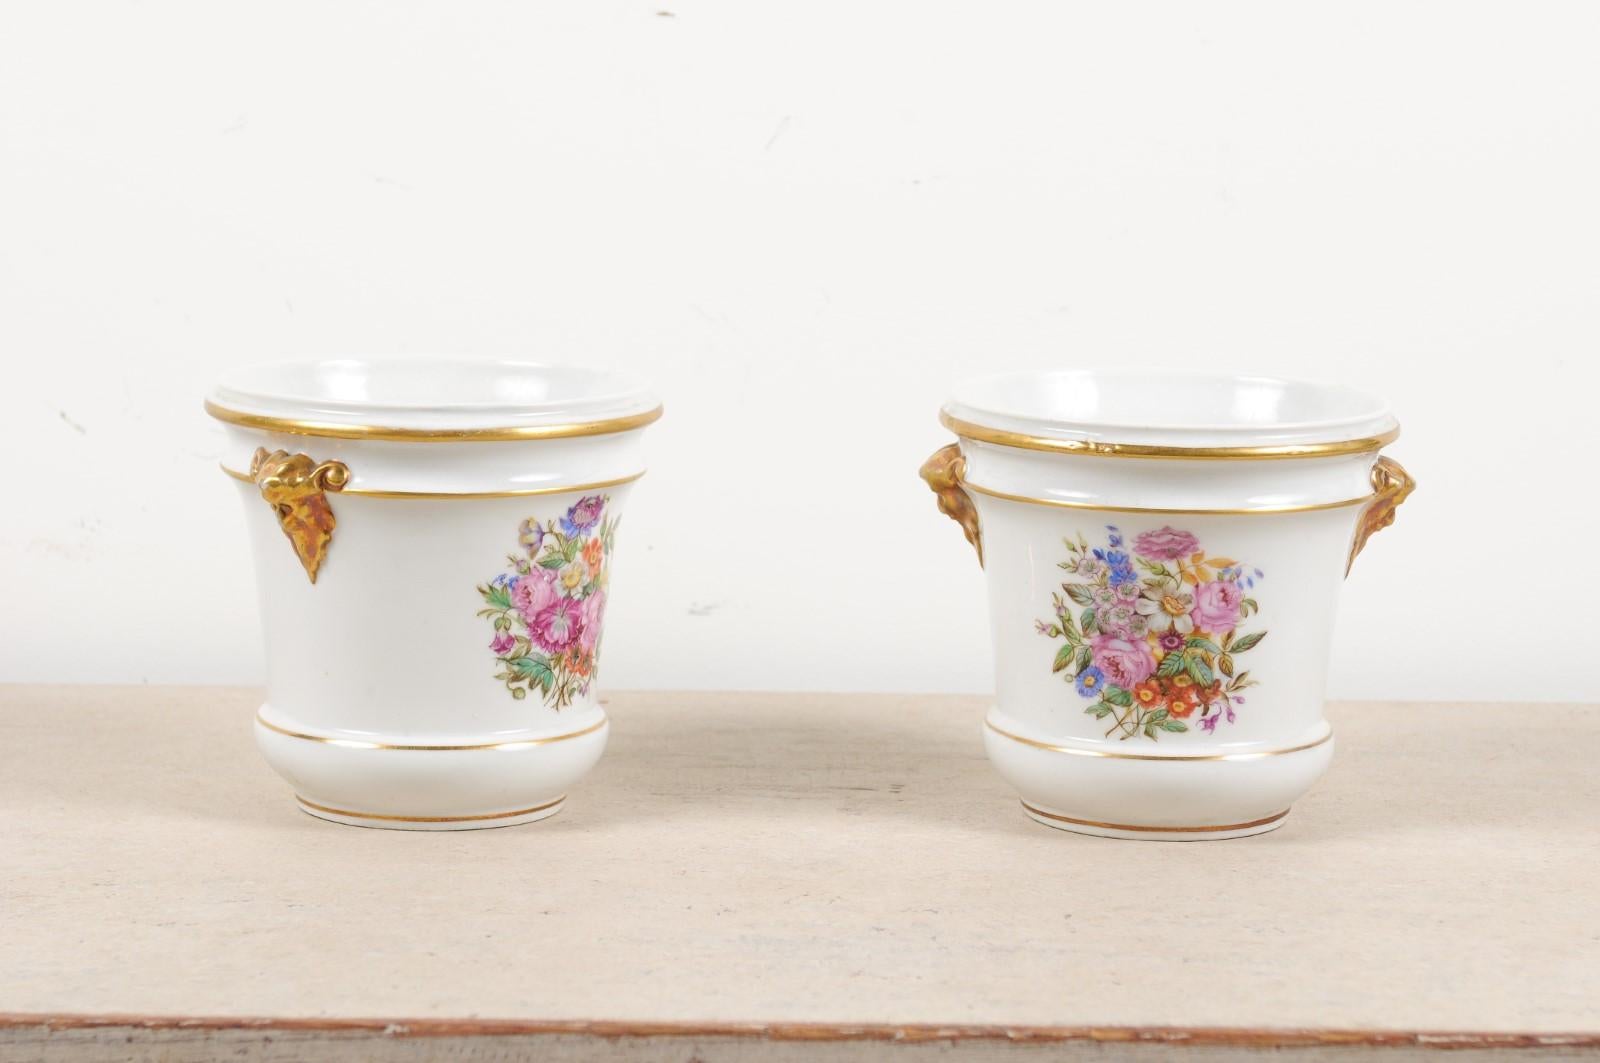 A pair of French Louis XVI period Paris porcelain cachepots from the late 18th century, with hand-painted floral décor and gilt accents. Created in France during the short reign of King Louis XVI, each of this pair of cachepots features a circular